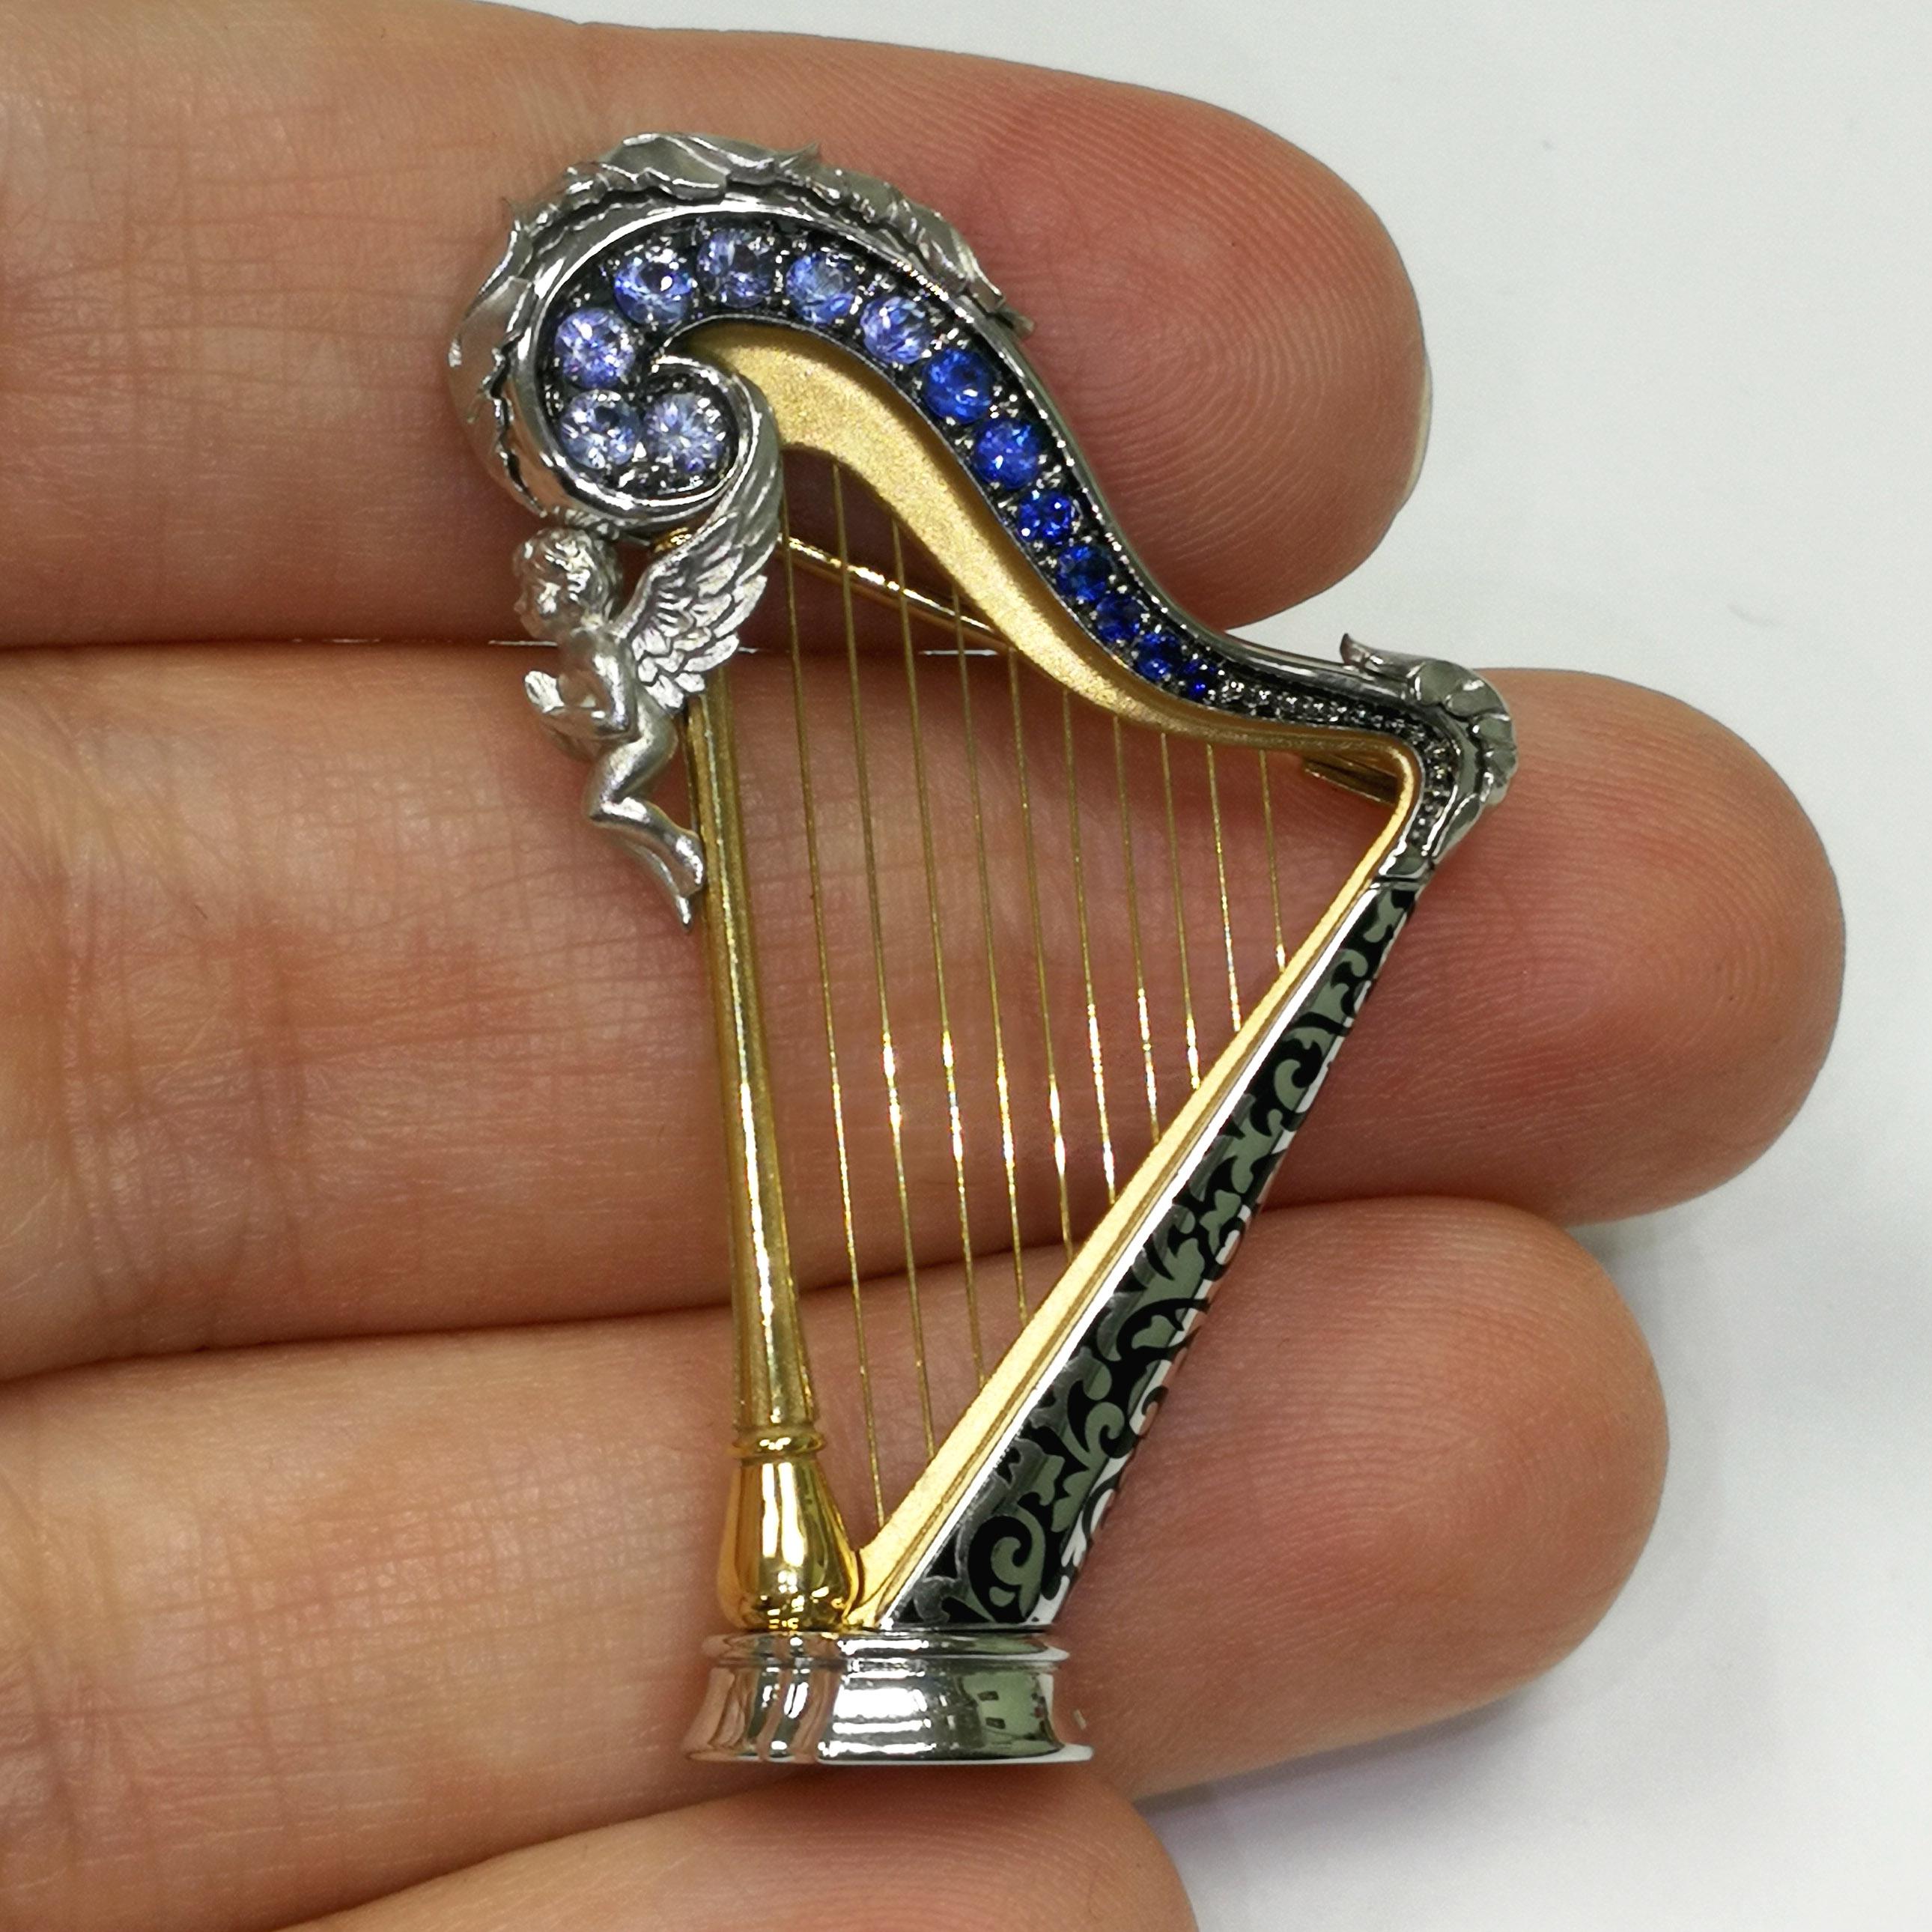 Blue Sapphires 18 Karat White Gold Harp Brooch
Harps were widely used in the ancient Mediterranean and Middle East, although rare in Greece and Rome; depictions survive from Egypt and Mesopotamia from about 3000 BCE. 
Thanks to its “universal